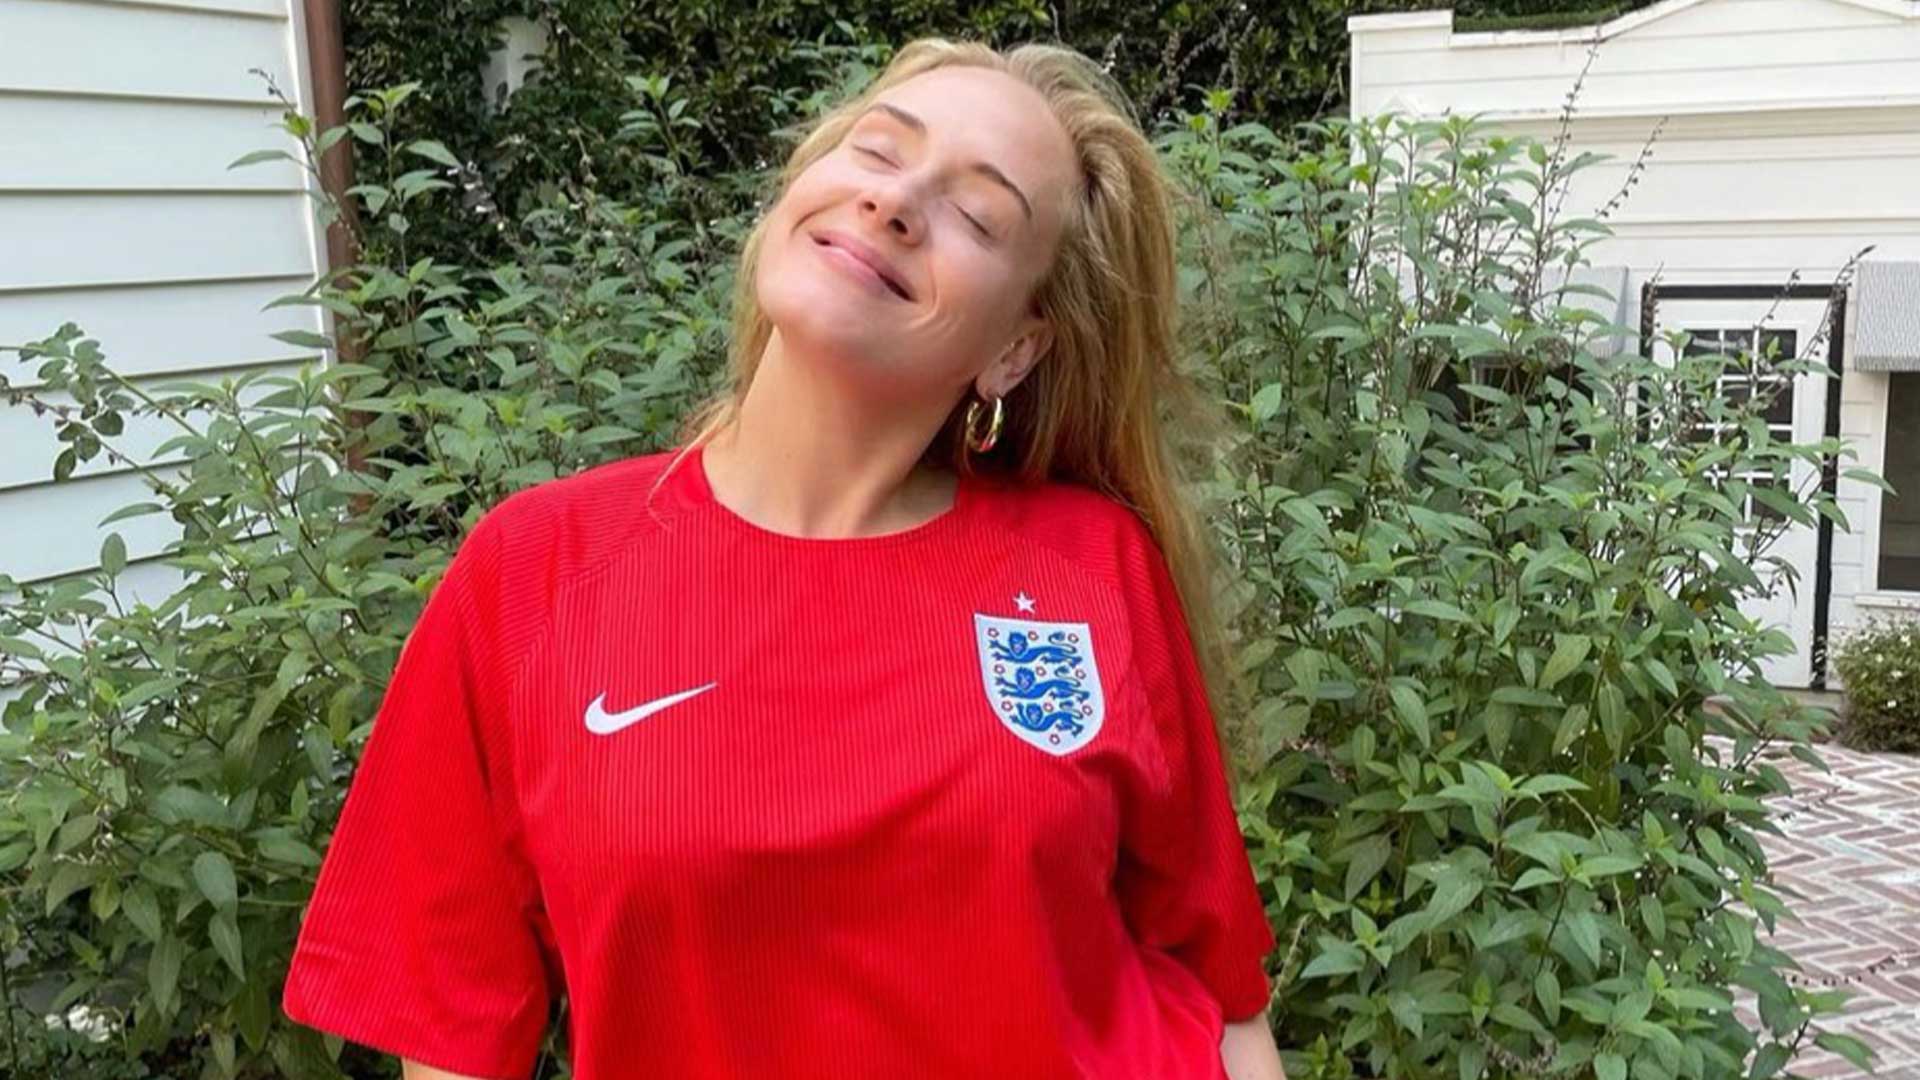 Adele in a red England shirt